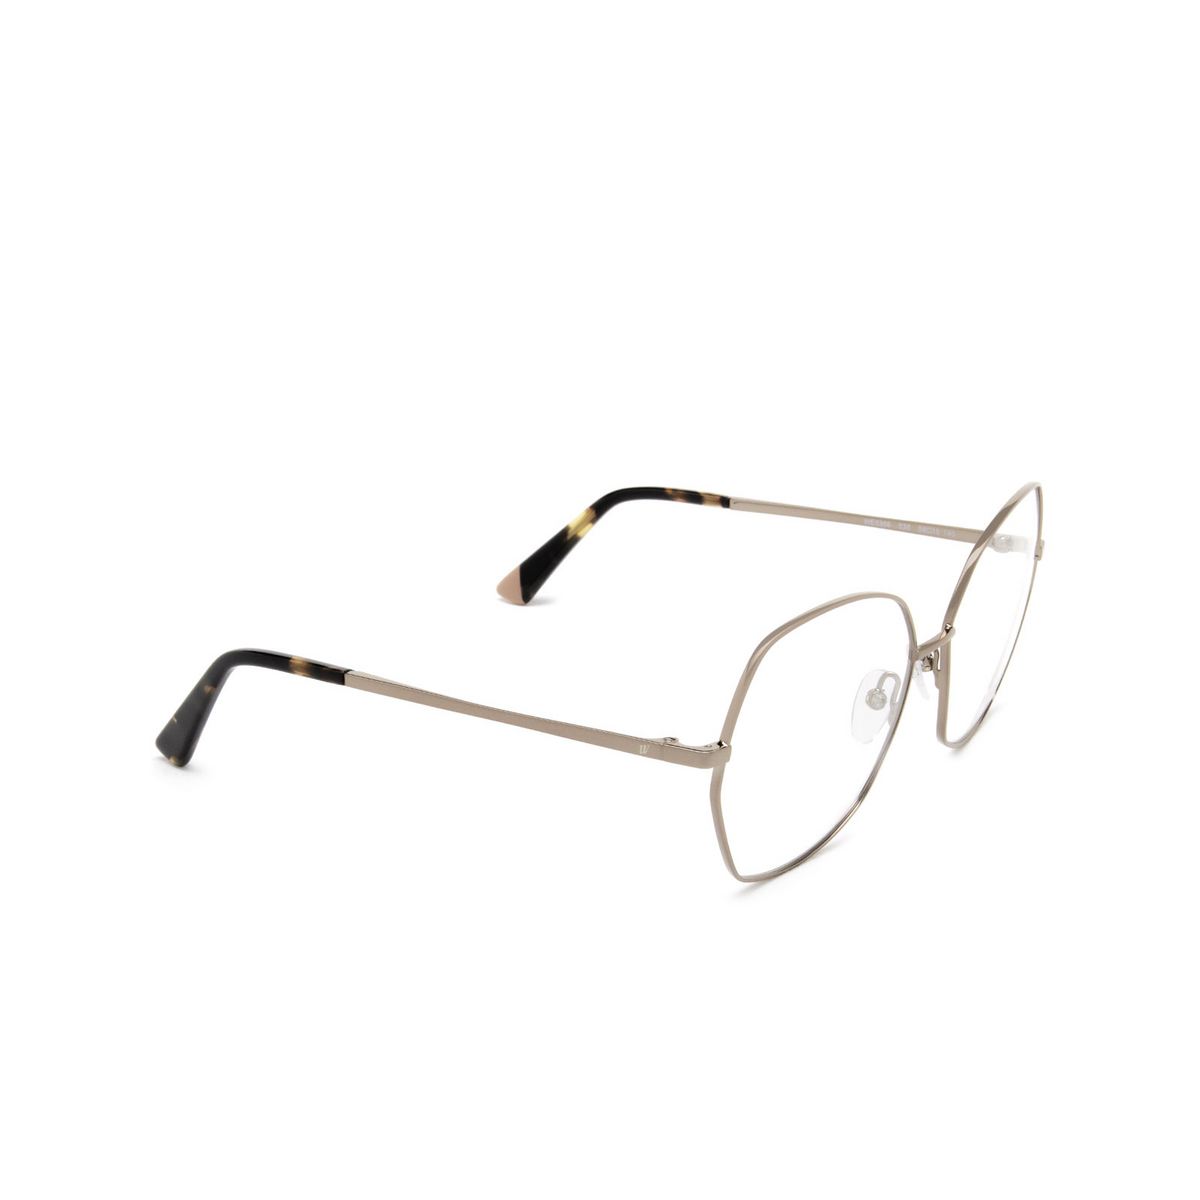 Web® Butterfly Eyeglasses: WE5366 color 038 Bronze - three-quarters view